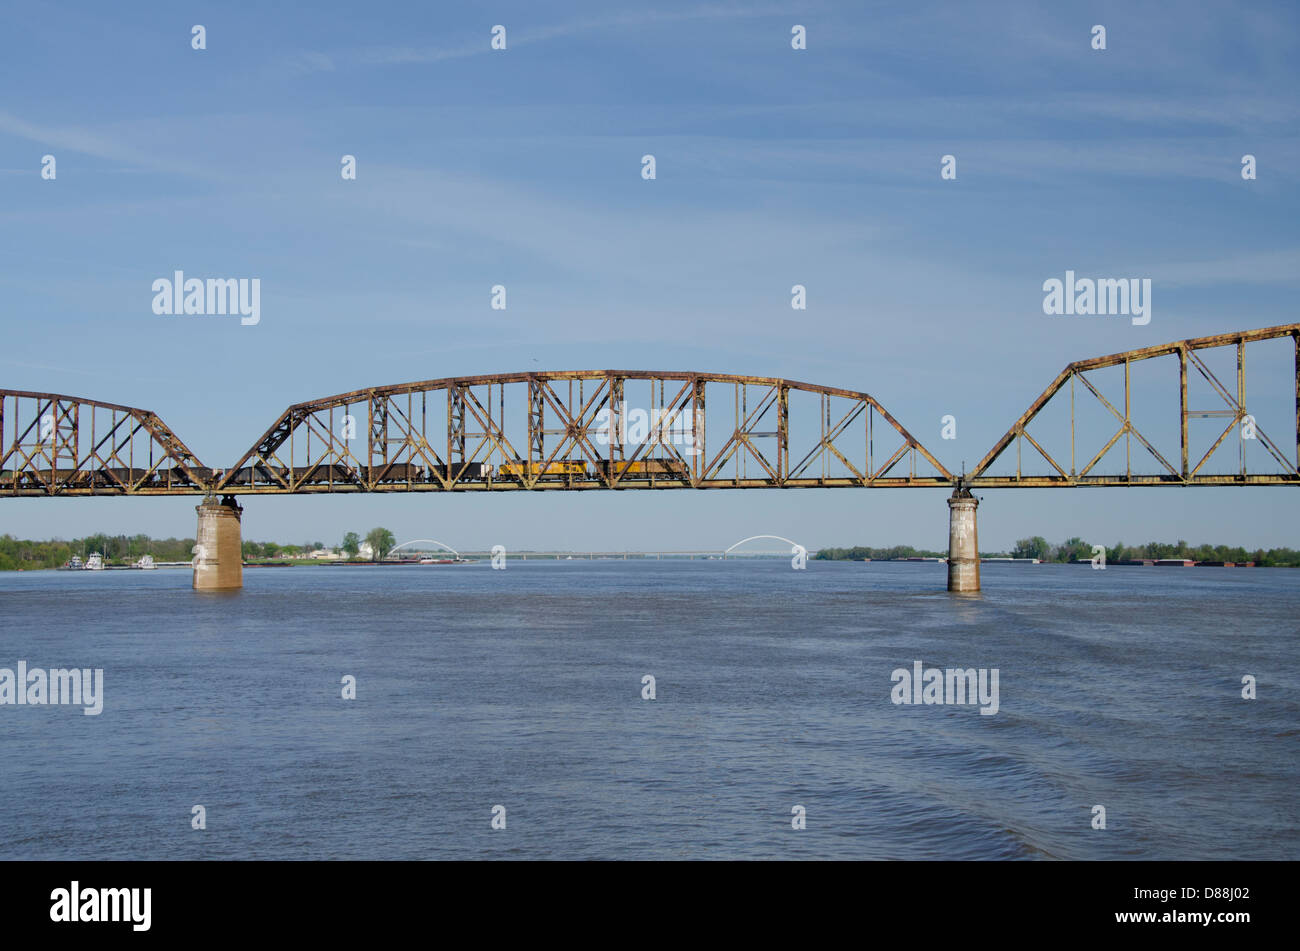 Kentucky / Ohio, Ohio River near the Mississippi River junction. Freight train traveling on bridge over the Ohio River. Stock Photo